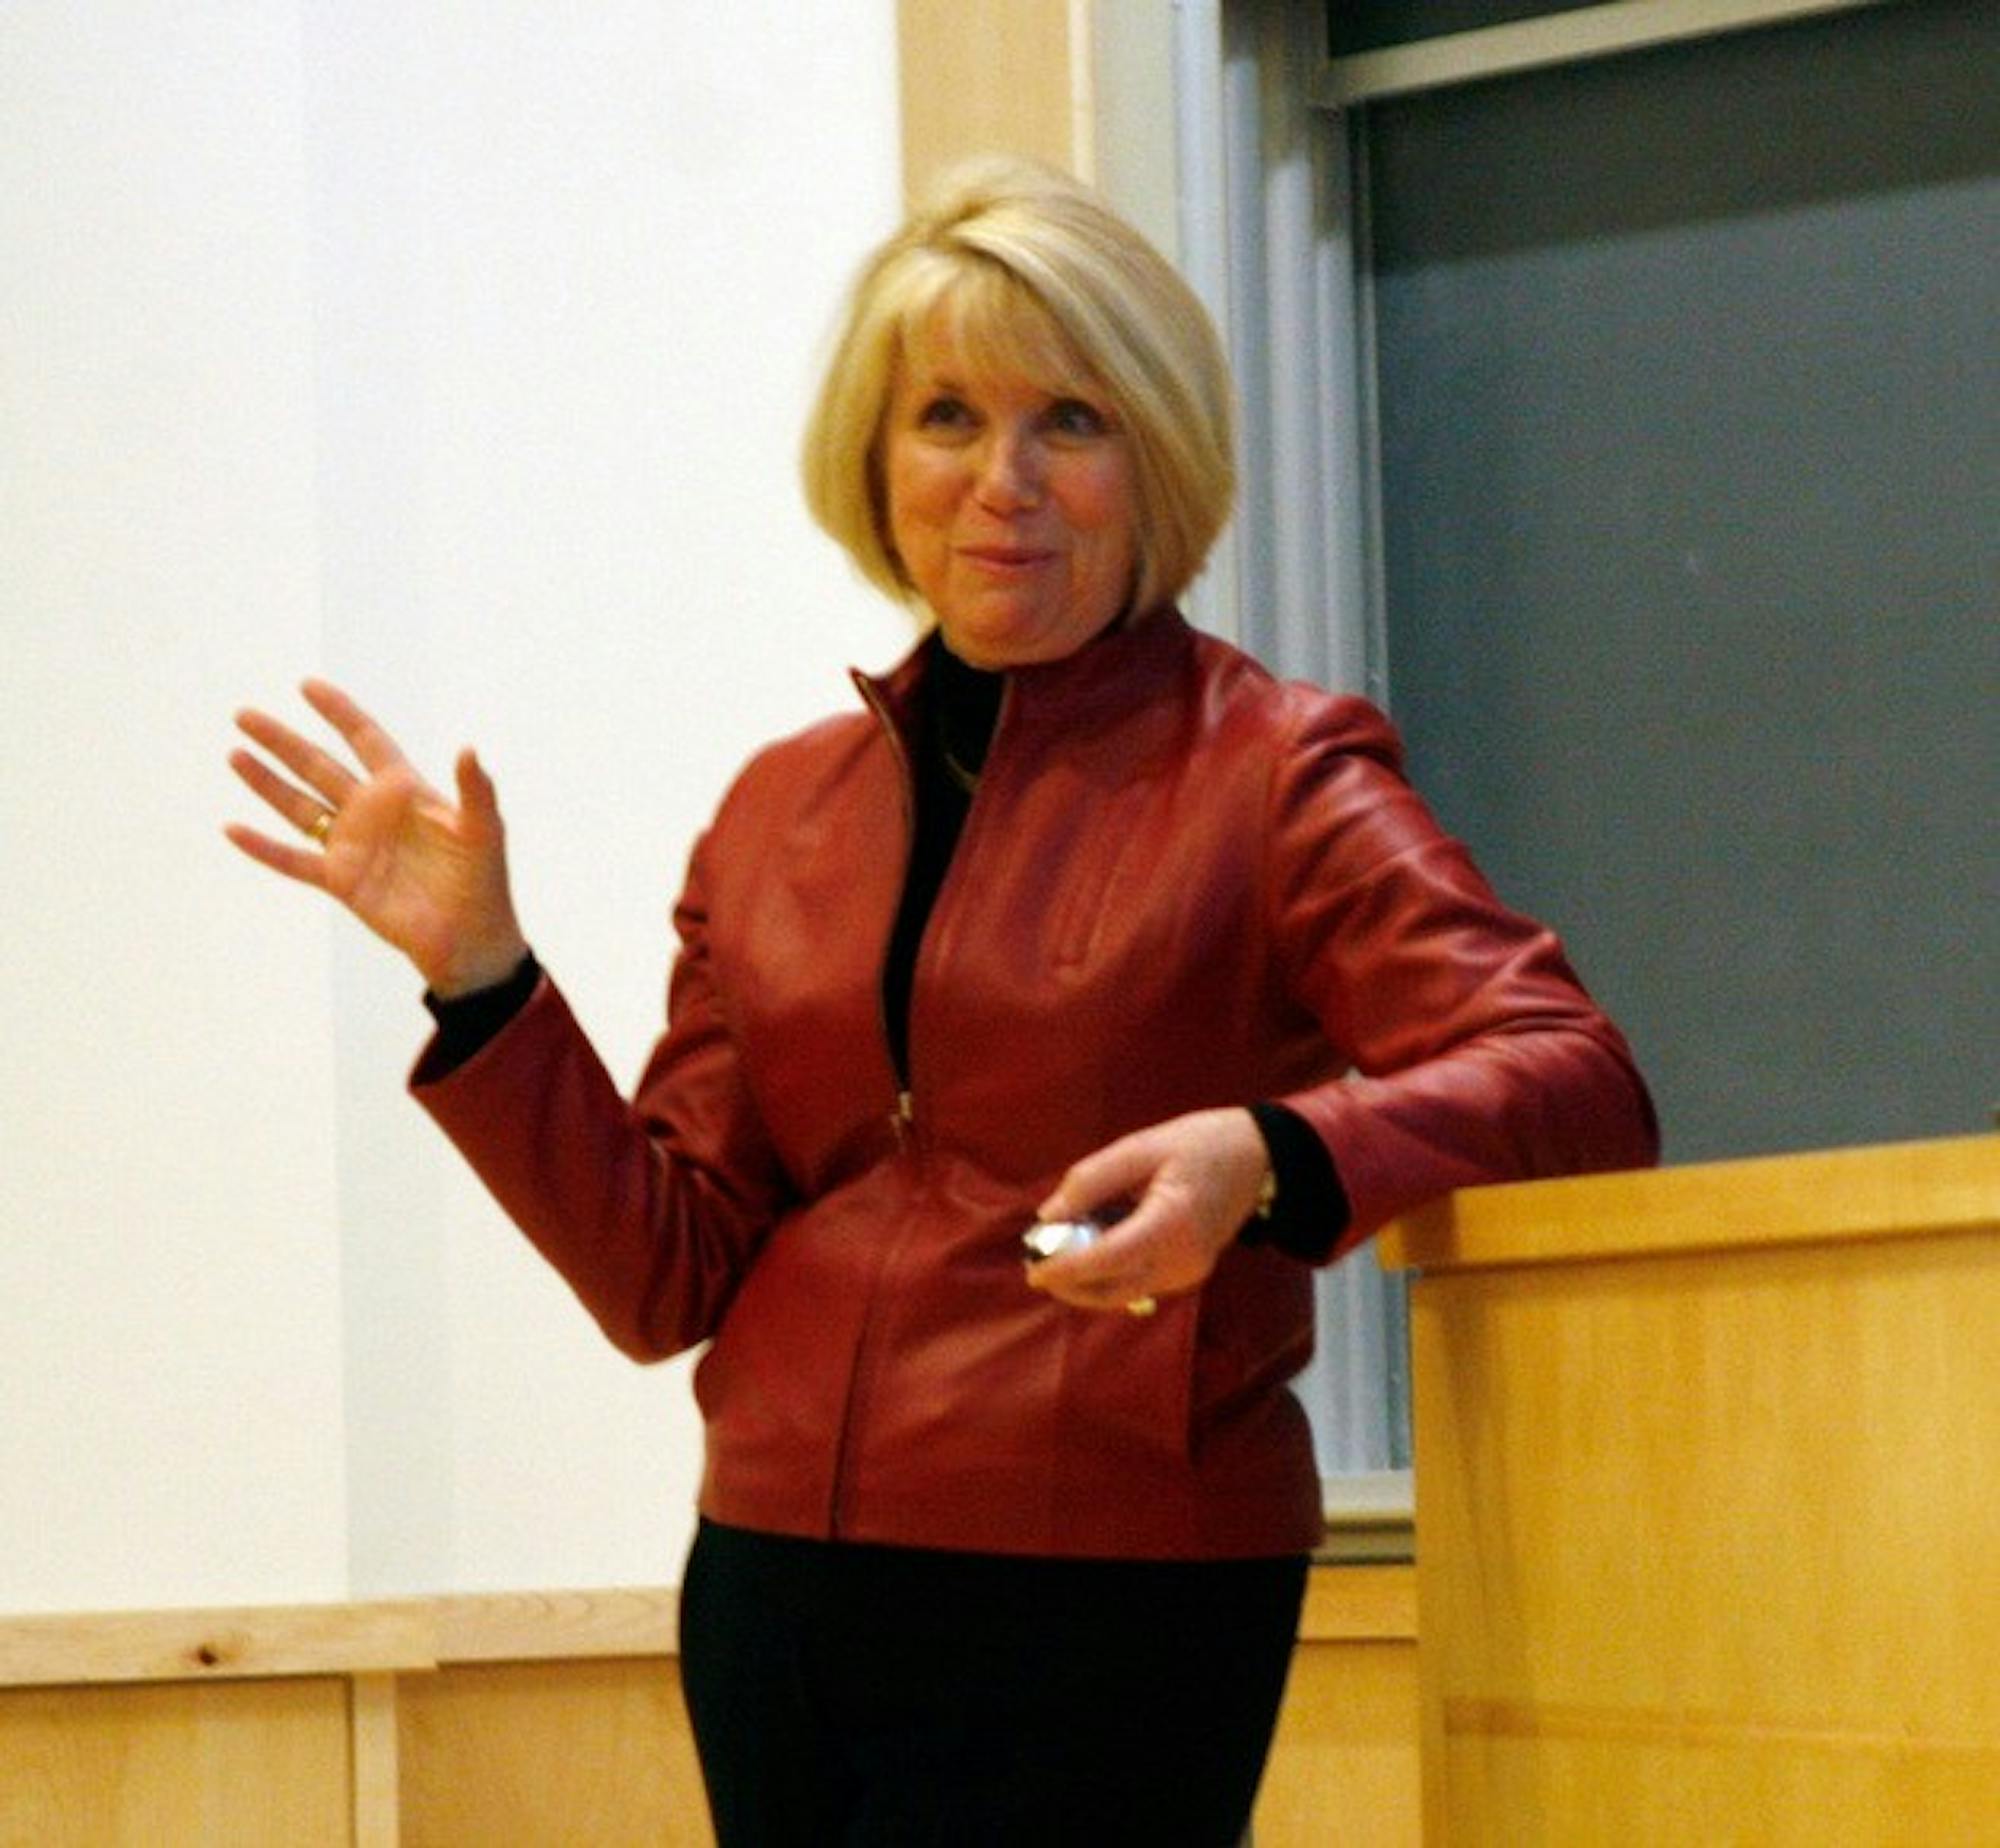 Ann Rhoades, who serves as a board member for Jet Blue Airlines, told students in the Haldeman Center about the importance of employees.